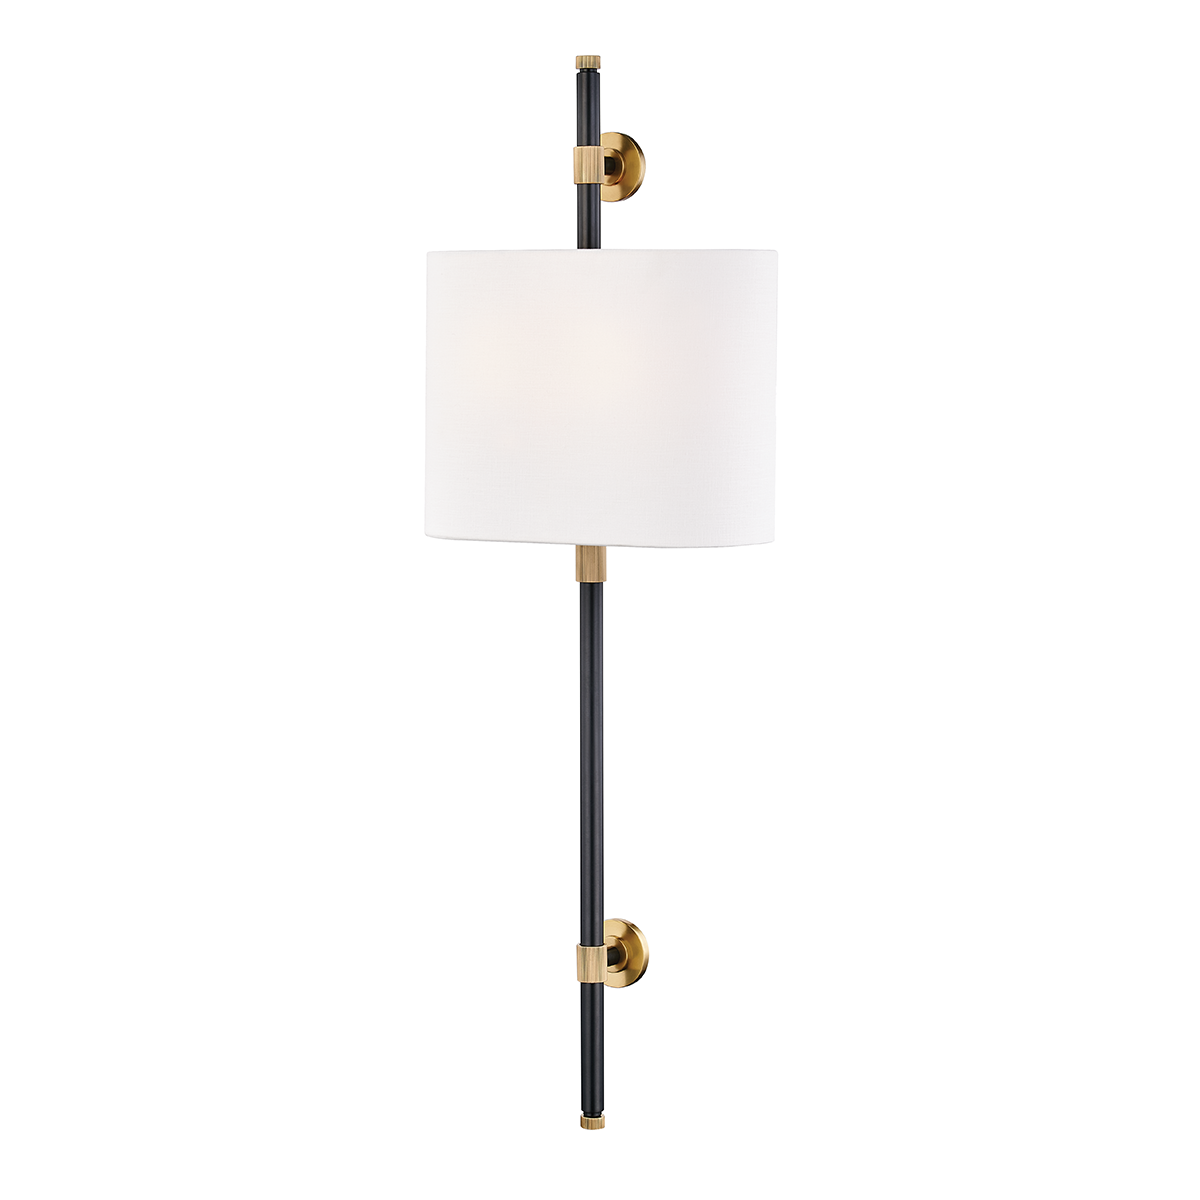 Hudson Valley Lighting Bowery Wall Sconce in Brass